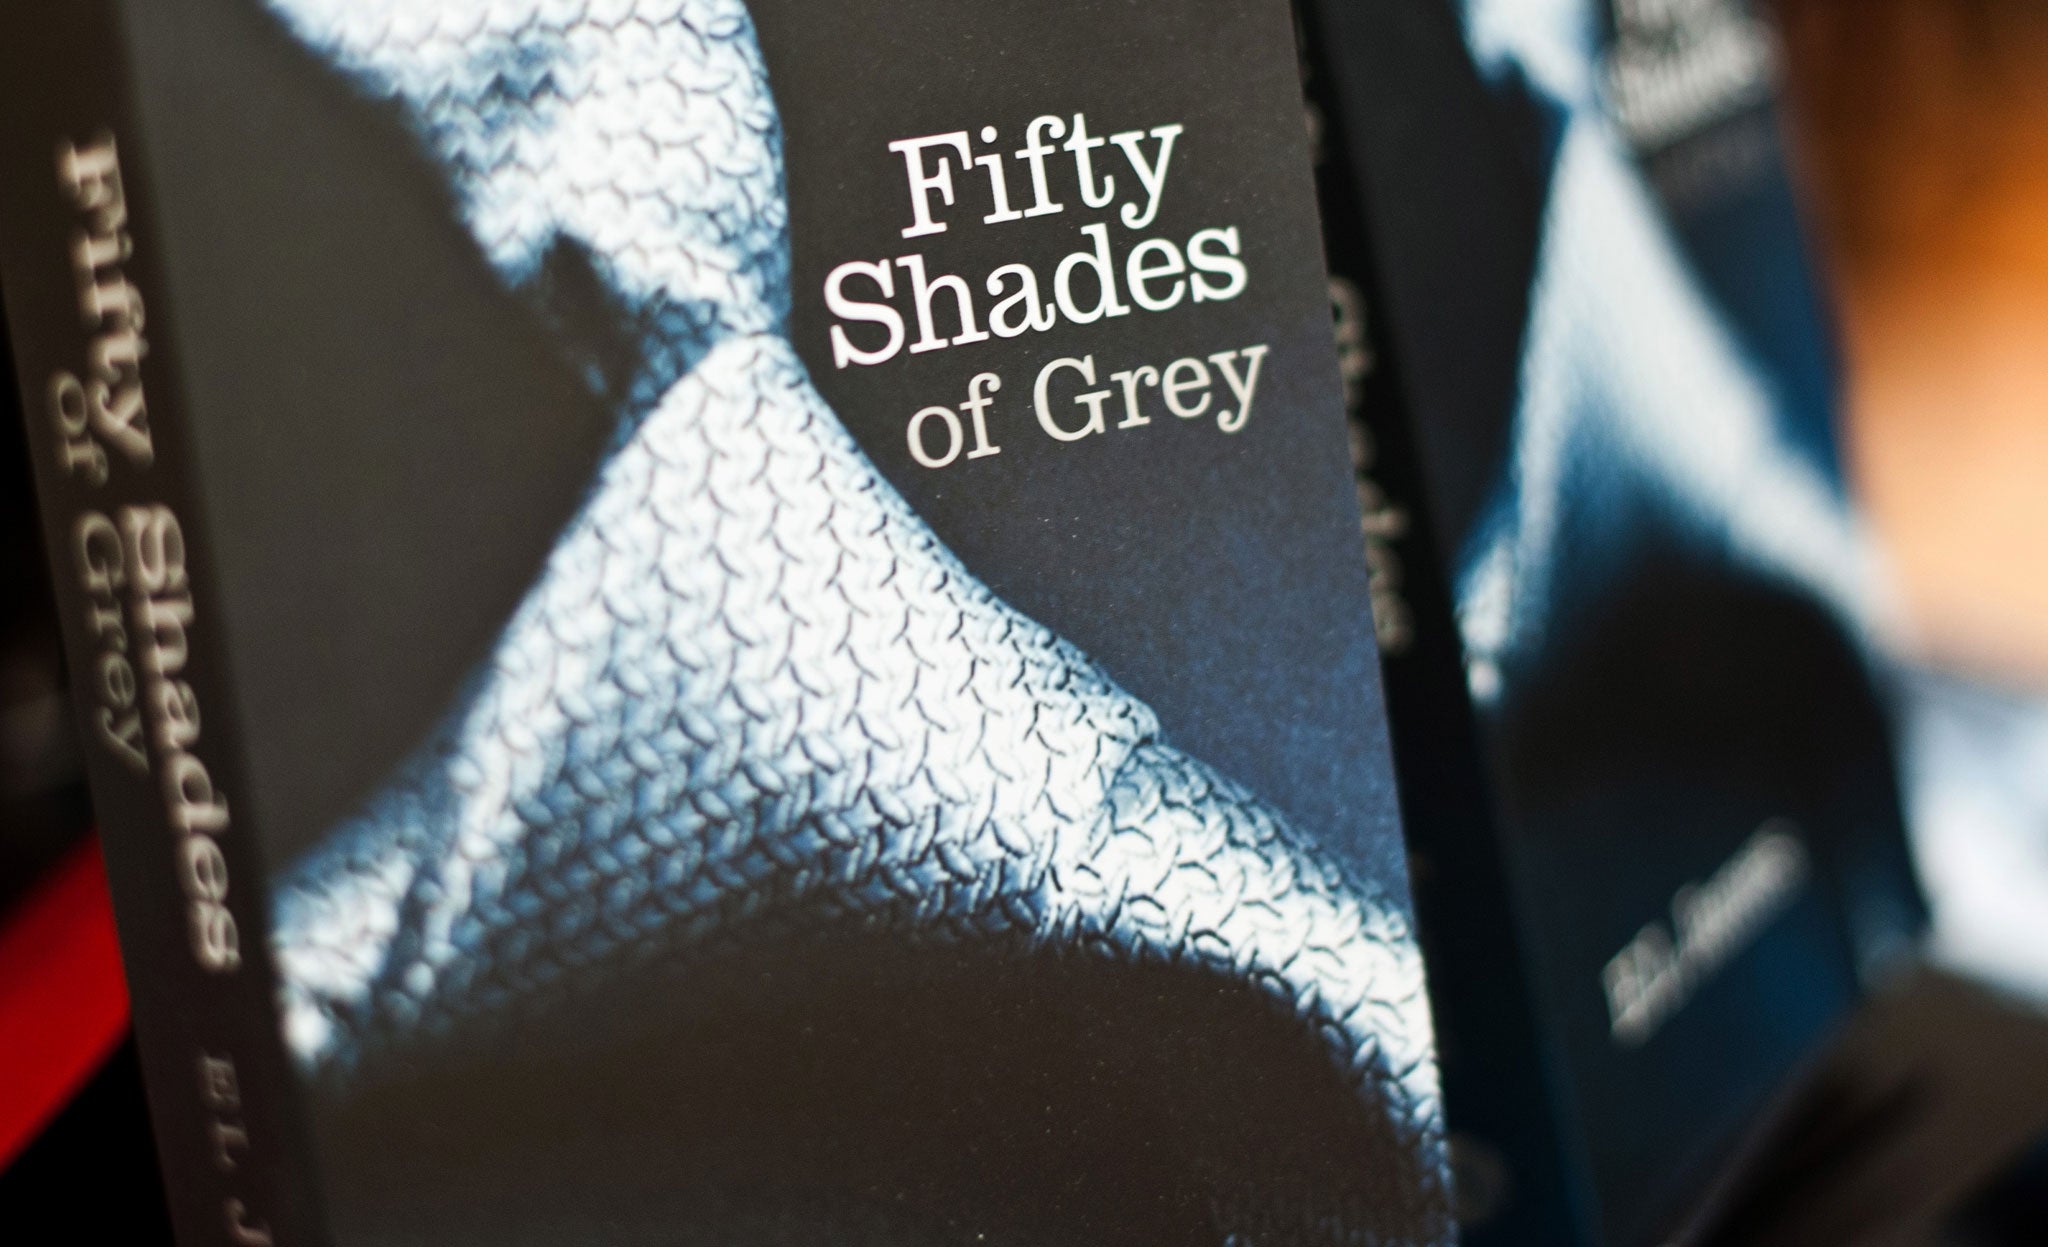 Explicit: The super-hit novel Fifty Shades of Grey has been criticised not for its graphic sexual content but for lacking literary merit and glamorising abusive relationships